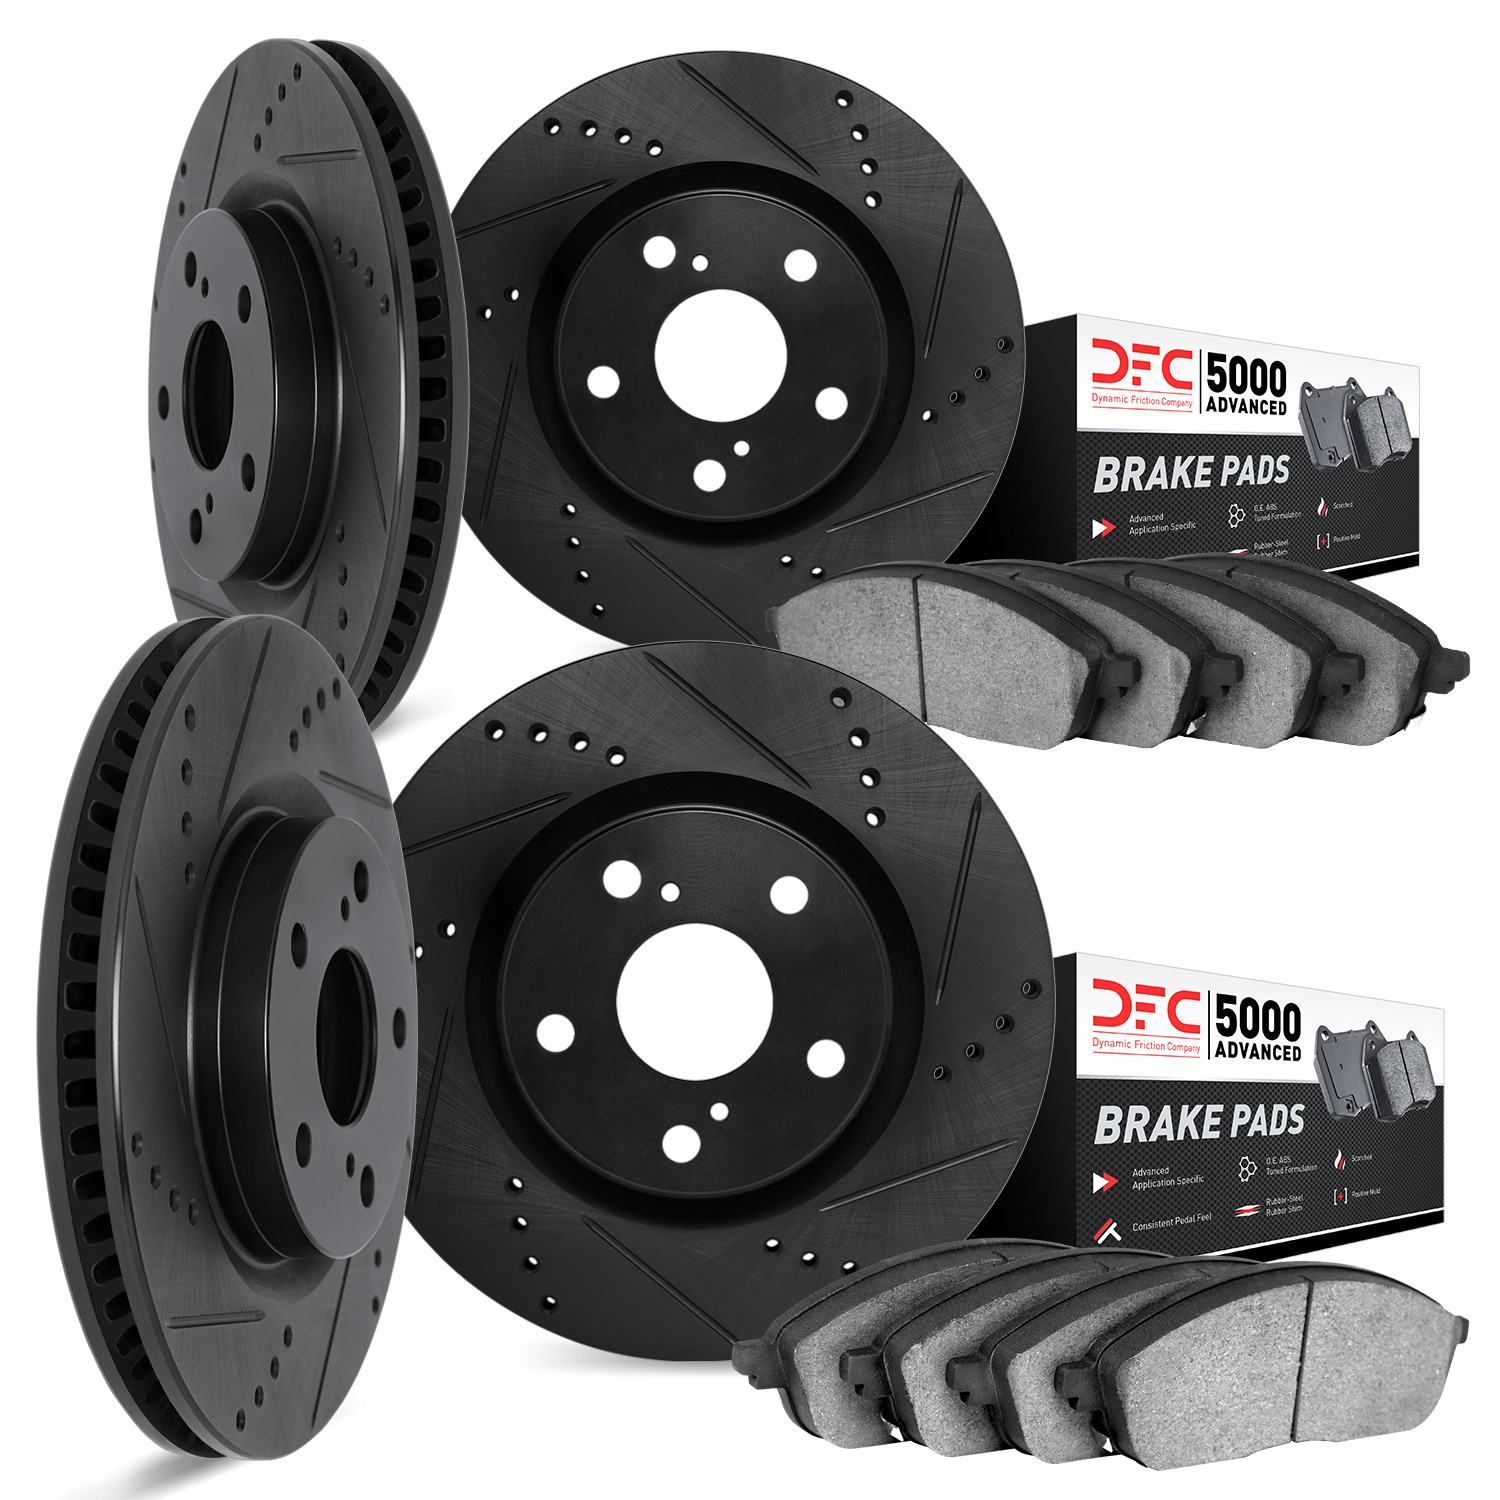 8504-31043 Drilled/Slotted Brake Rotors w/5000 Advanced Brake Pads Kit [Black], 2010-2017 BMW, Position: Front and Rear